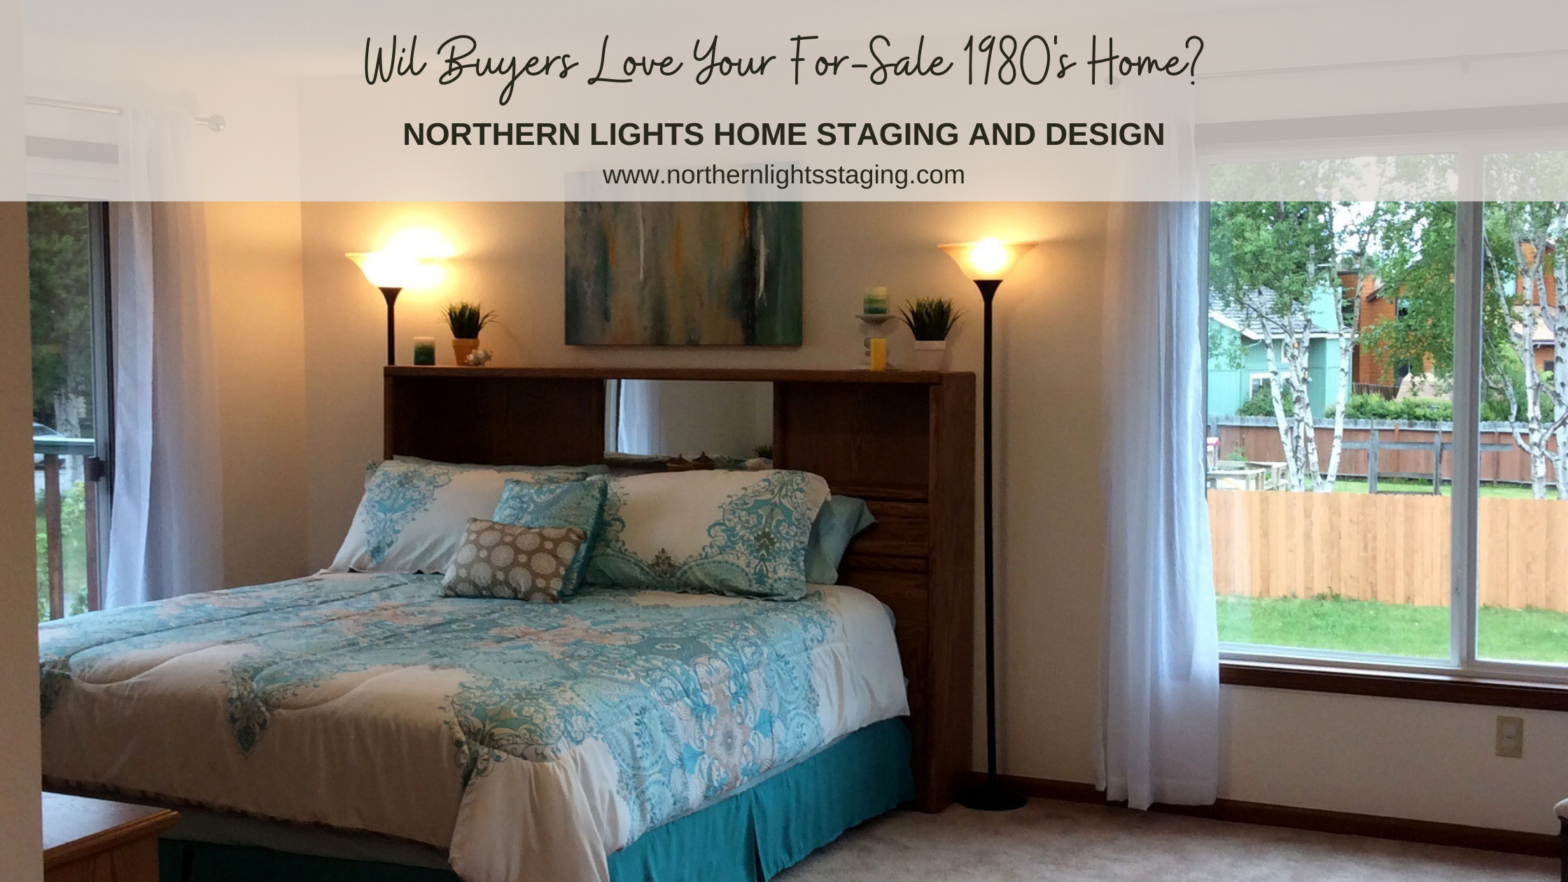 Will Buyers Love Your For Sale 1980's Home? Northern LIghts Home Staging and Design